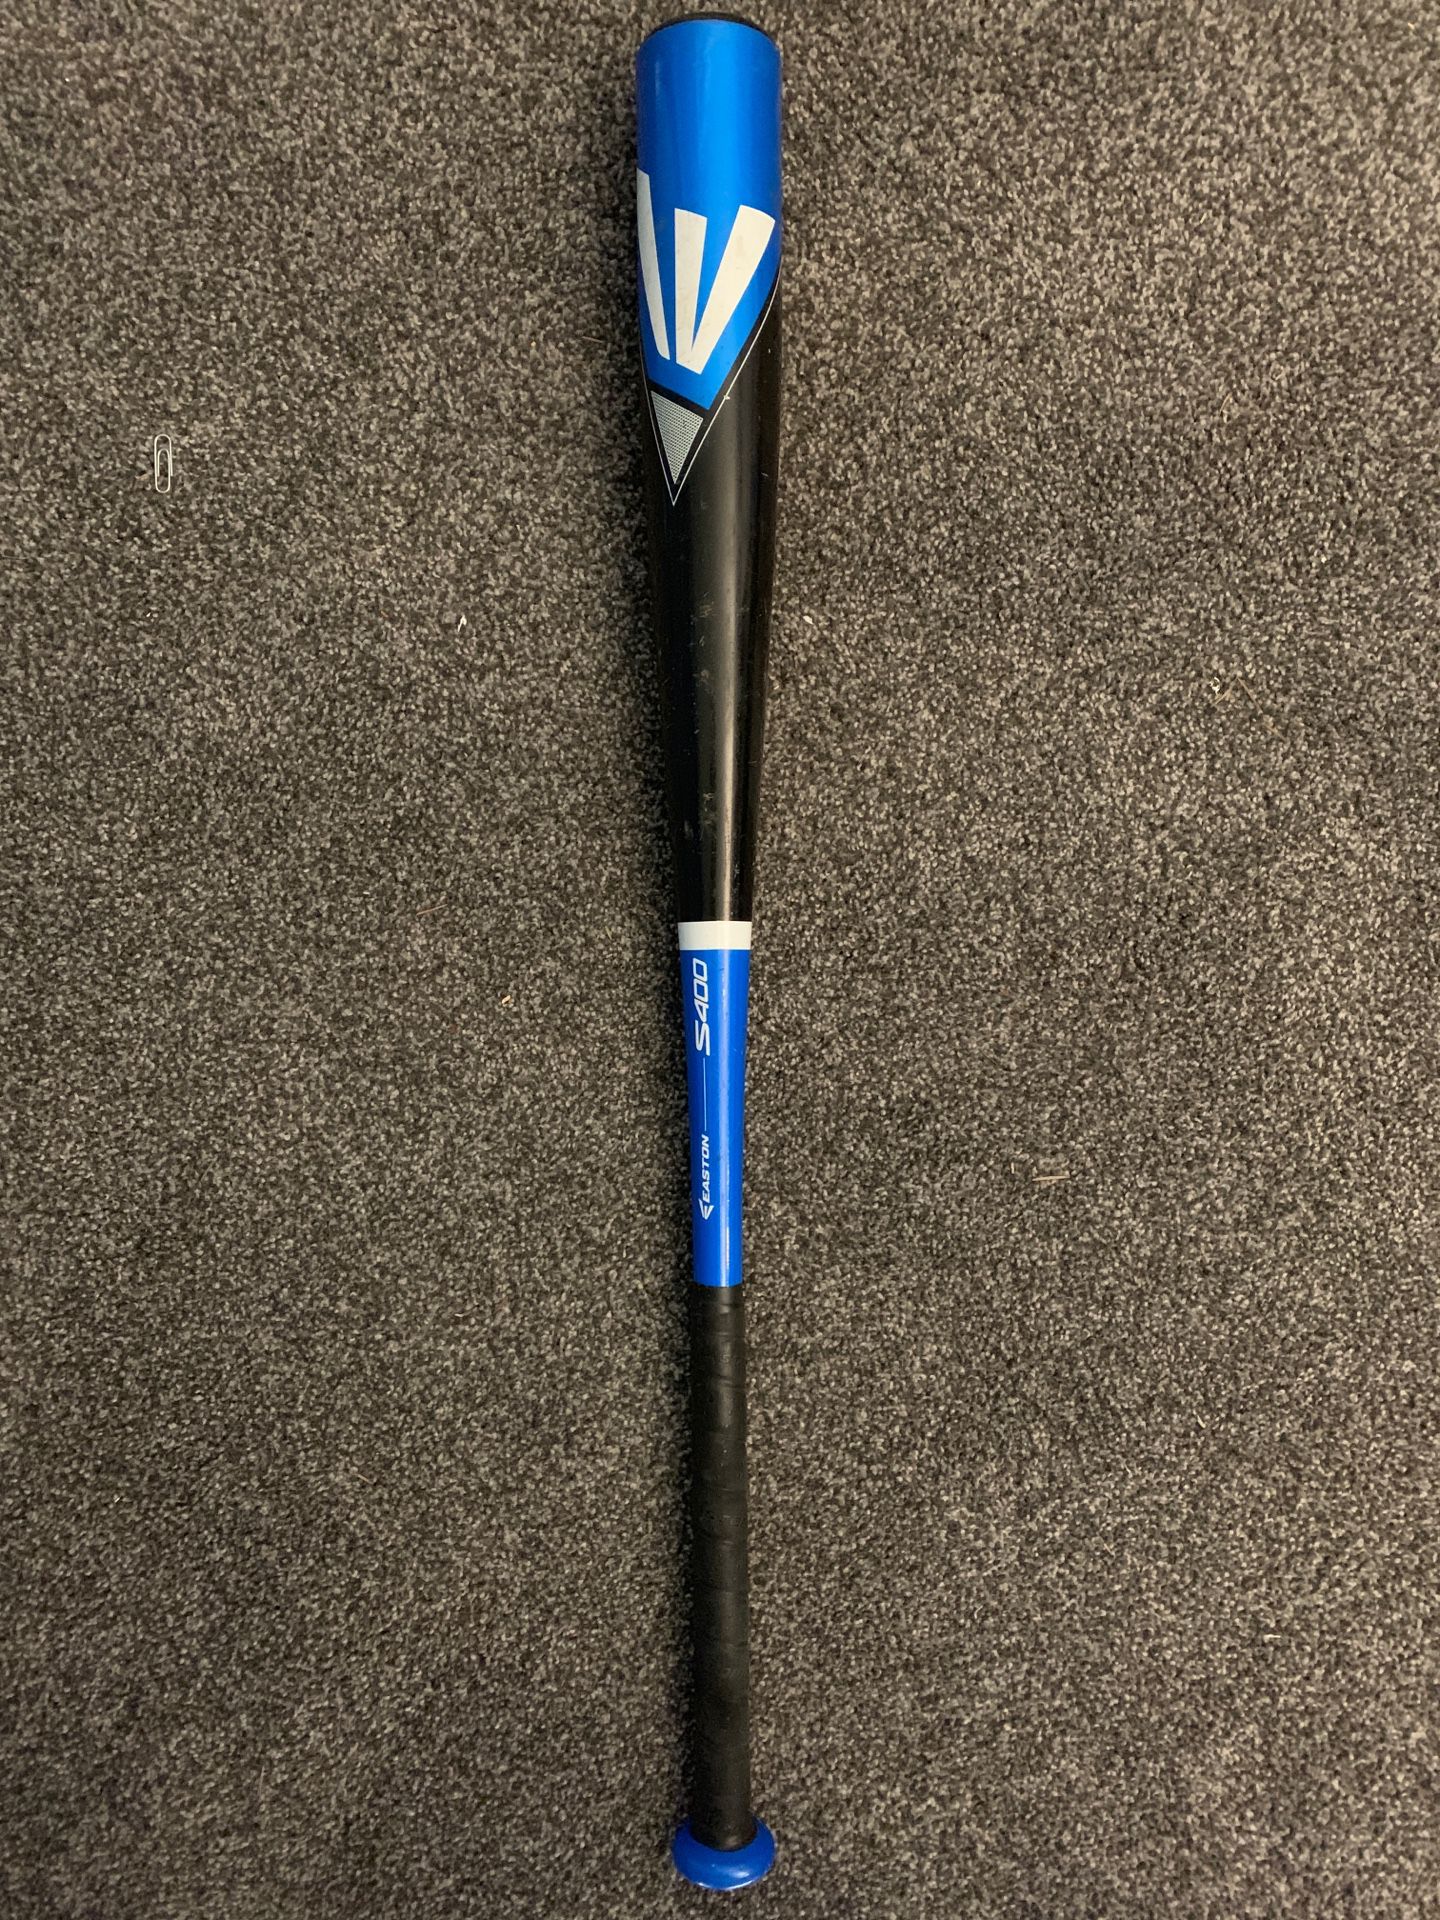 Easton s400 |33inch, 30oz| -3 bbcor. Lightly used